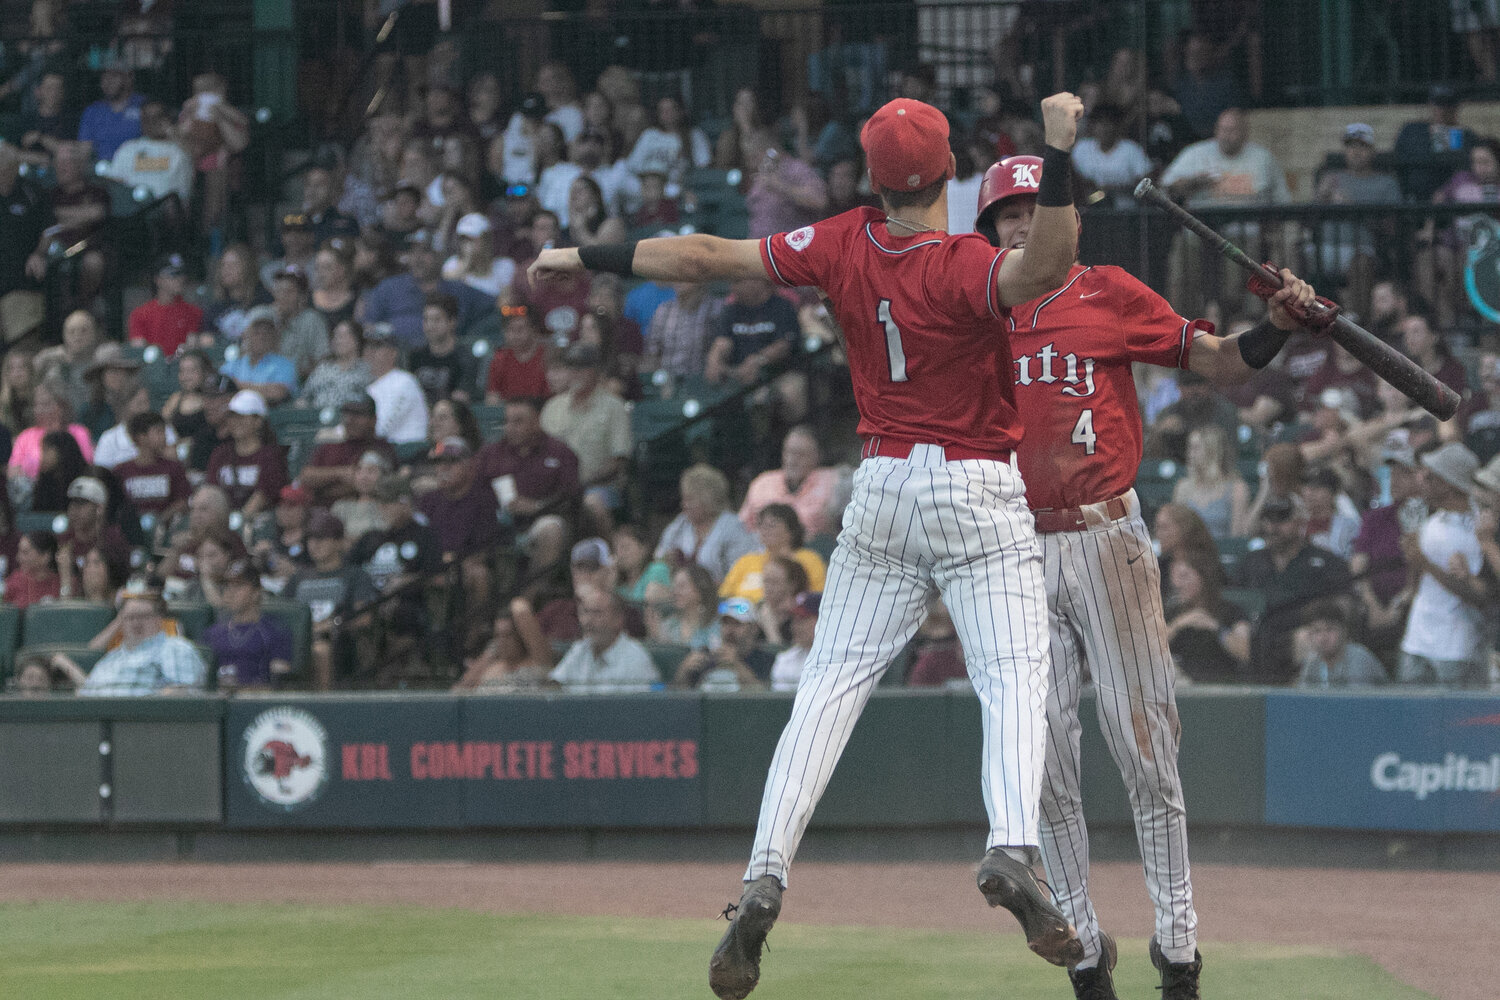 Andrew Horner and Graham Laxton celebrate after Horner scored a run during Friday's Regional Final between Katy and Pearland at Constellation Field in Sugar Land.